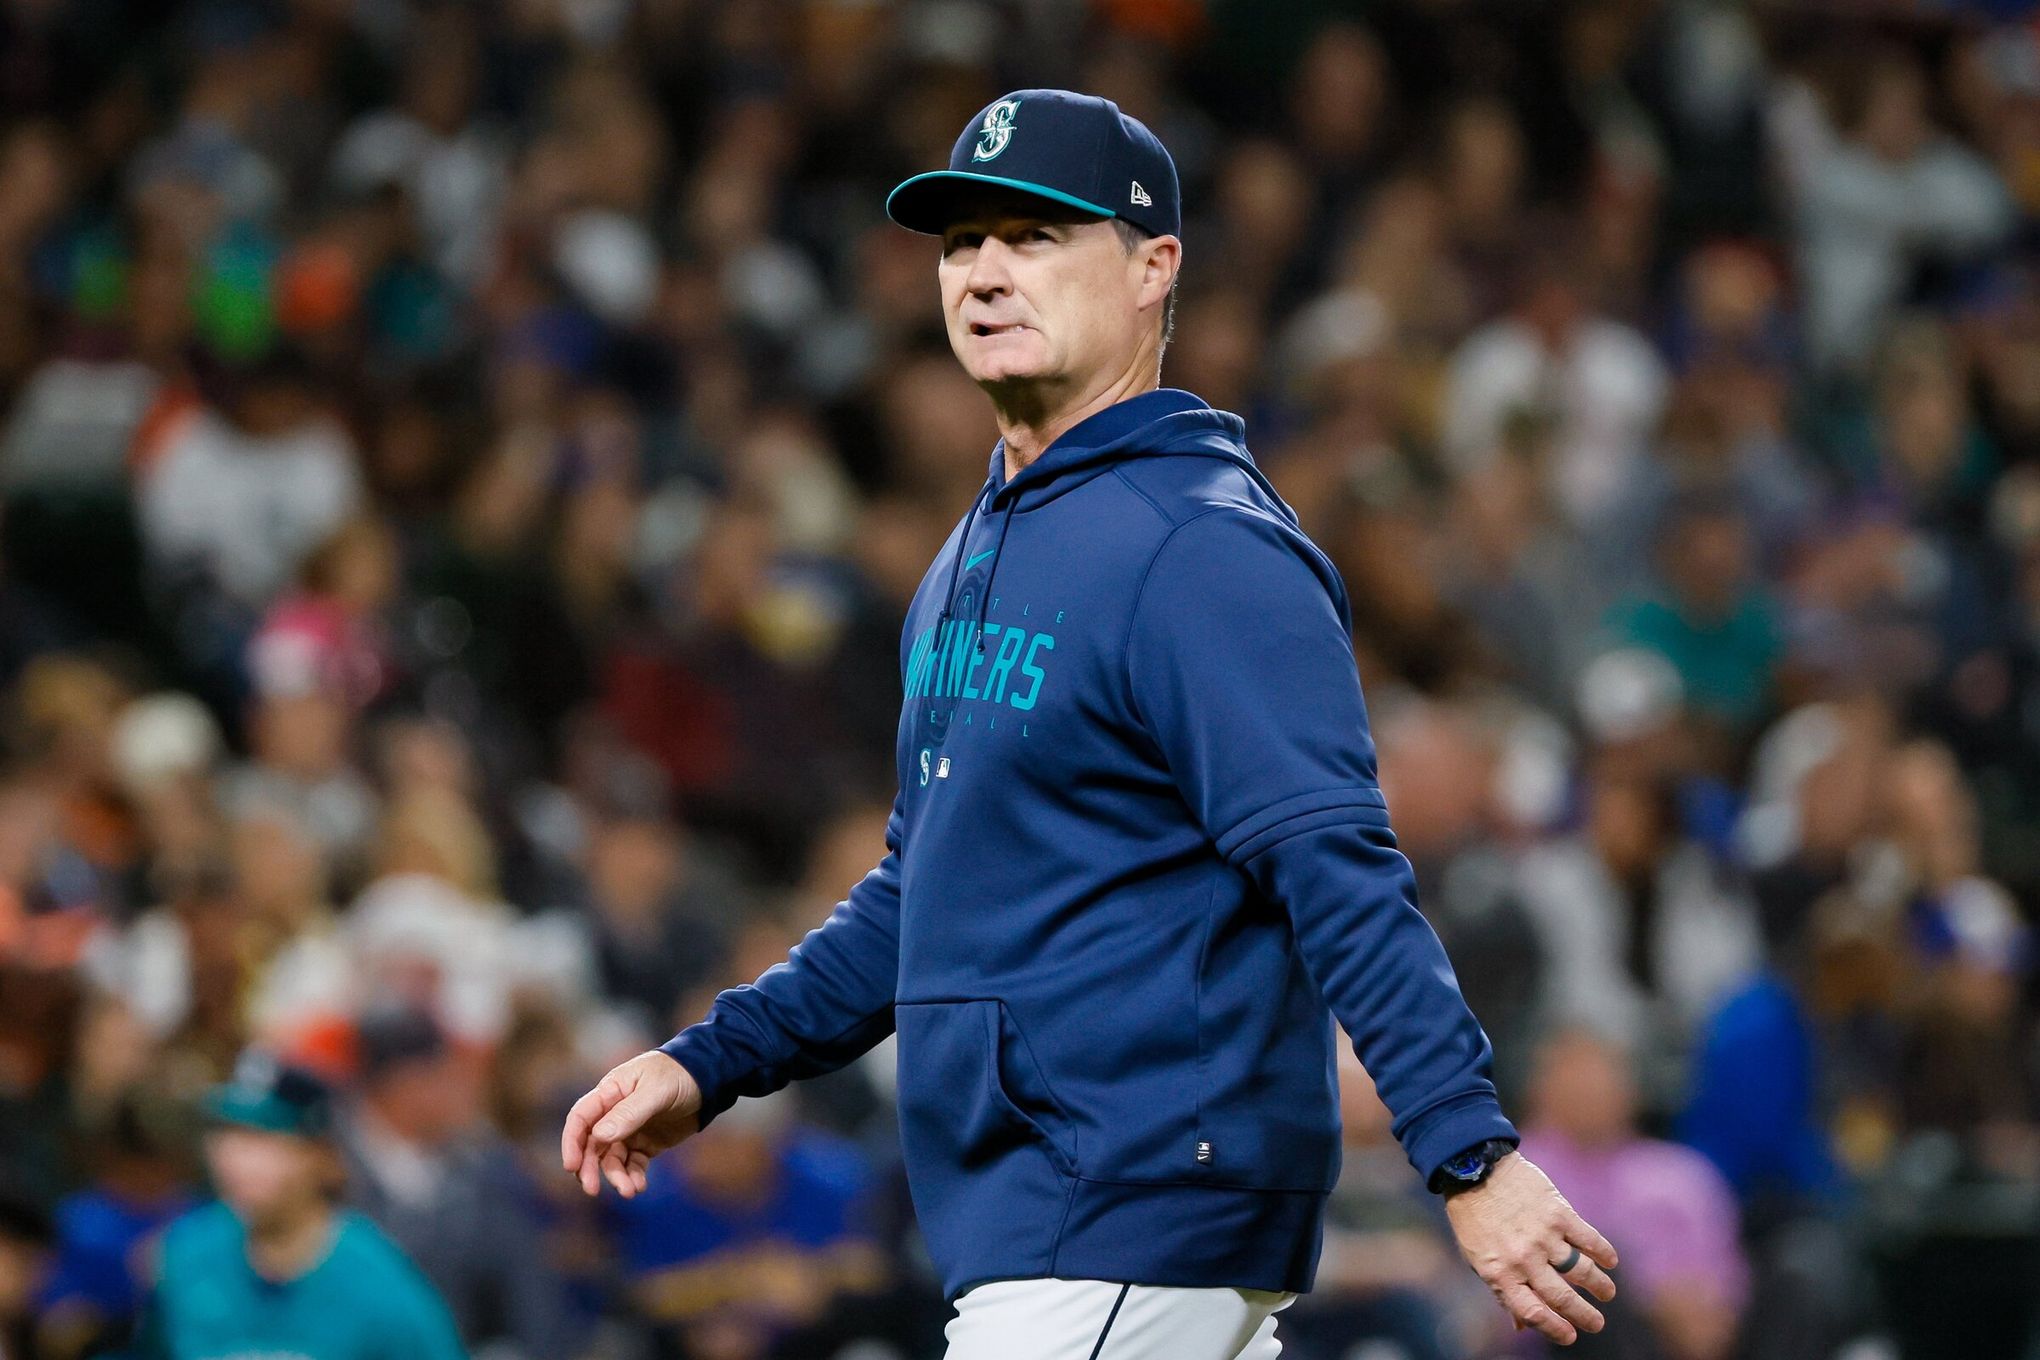 Run aground: Mariners playoff potential plummeting after fourth straight  loss — Converge Media